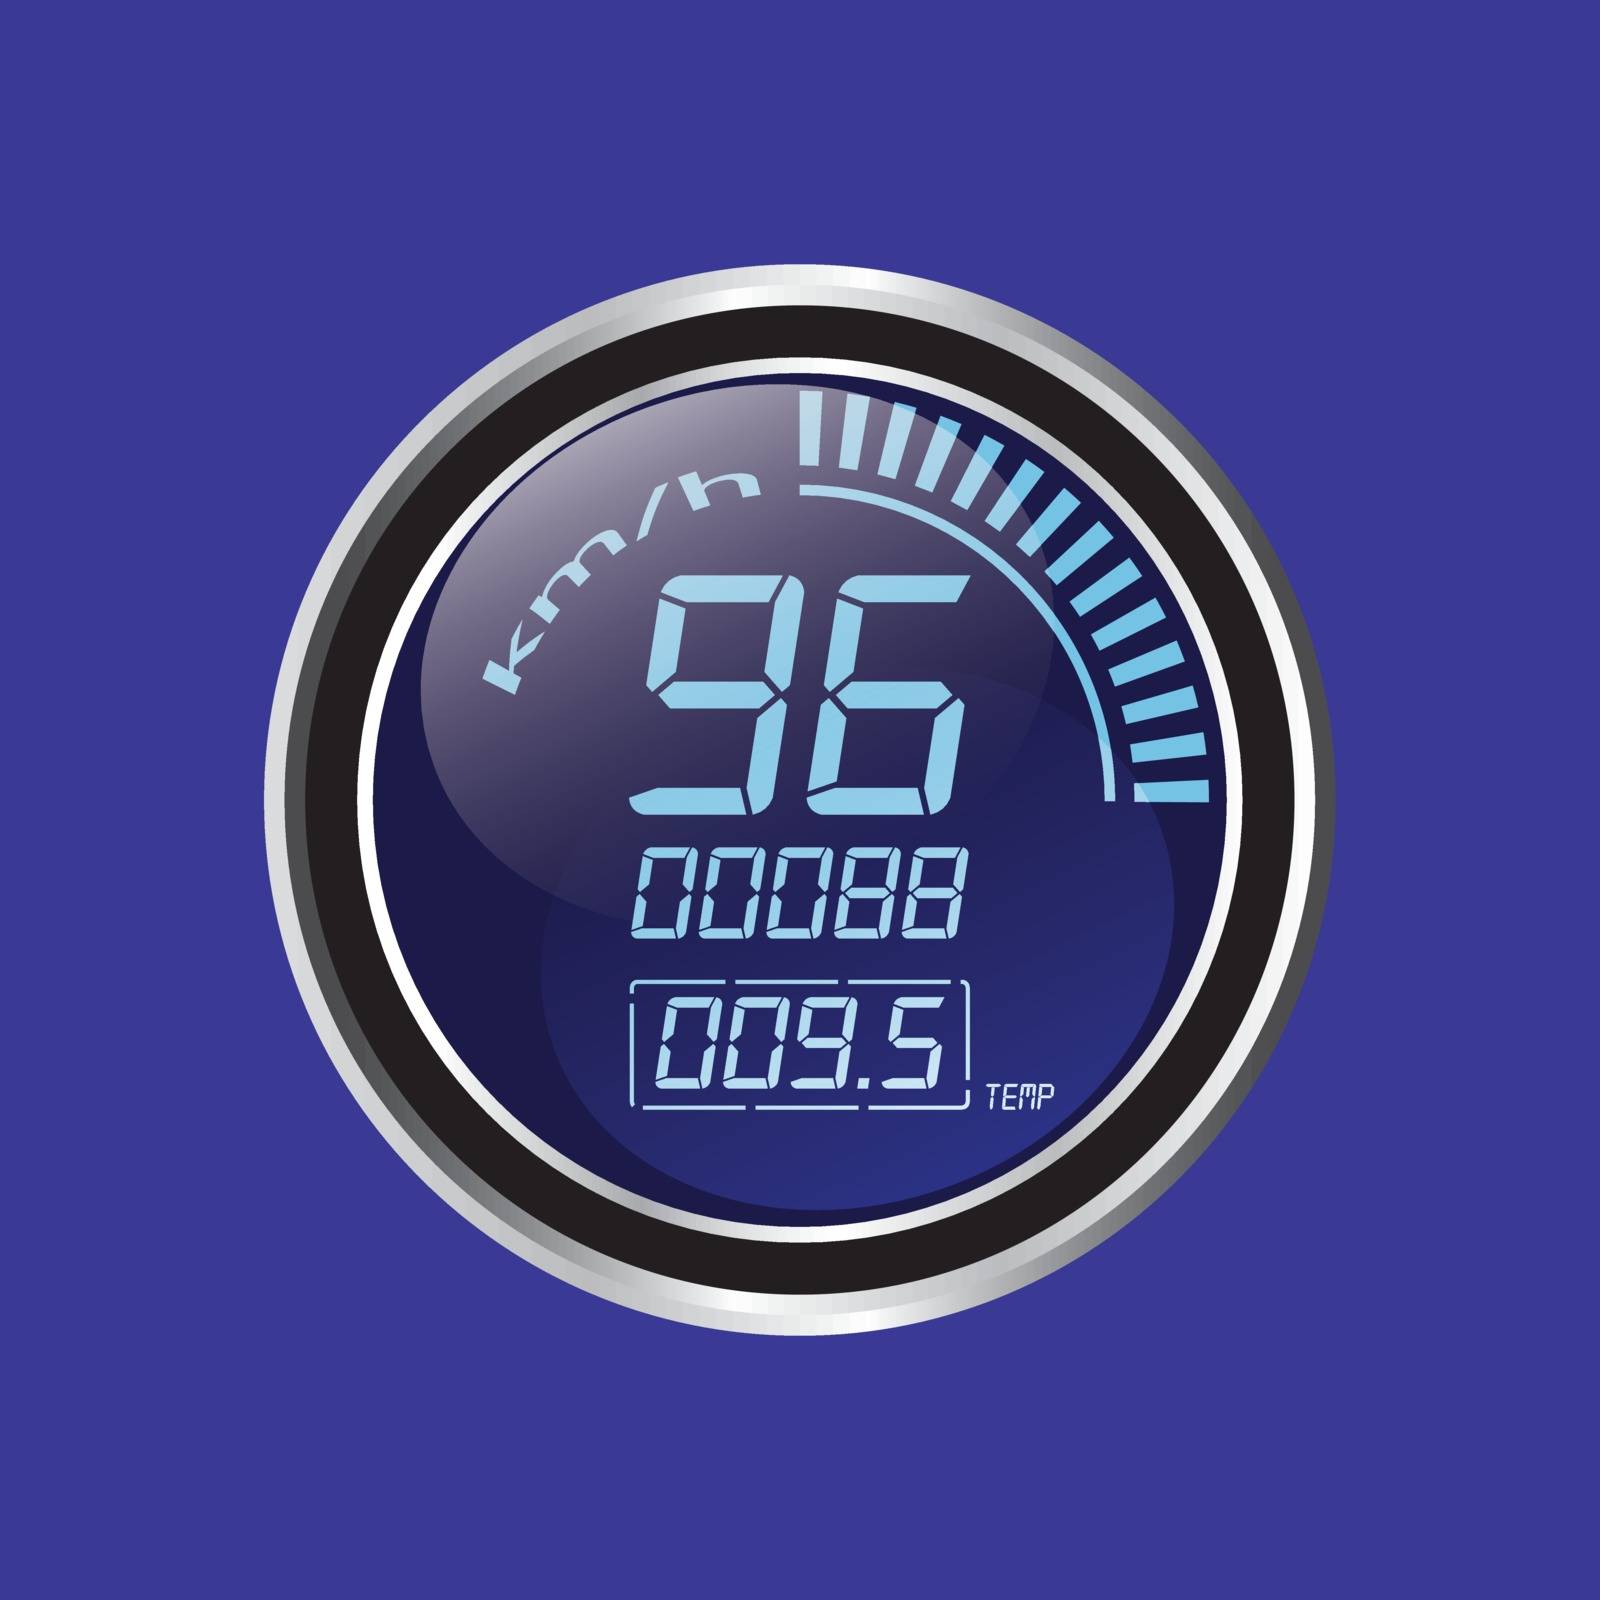 Speed thermometer on vector graphic art. by narinbg